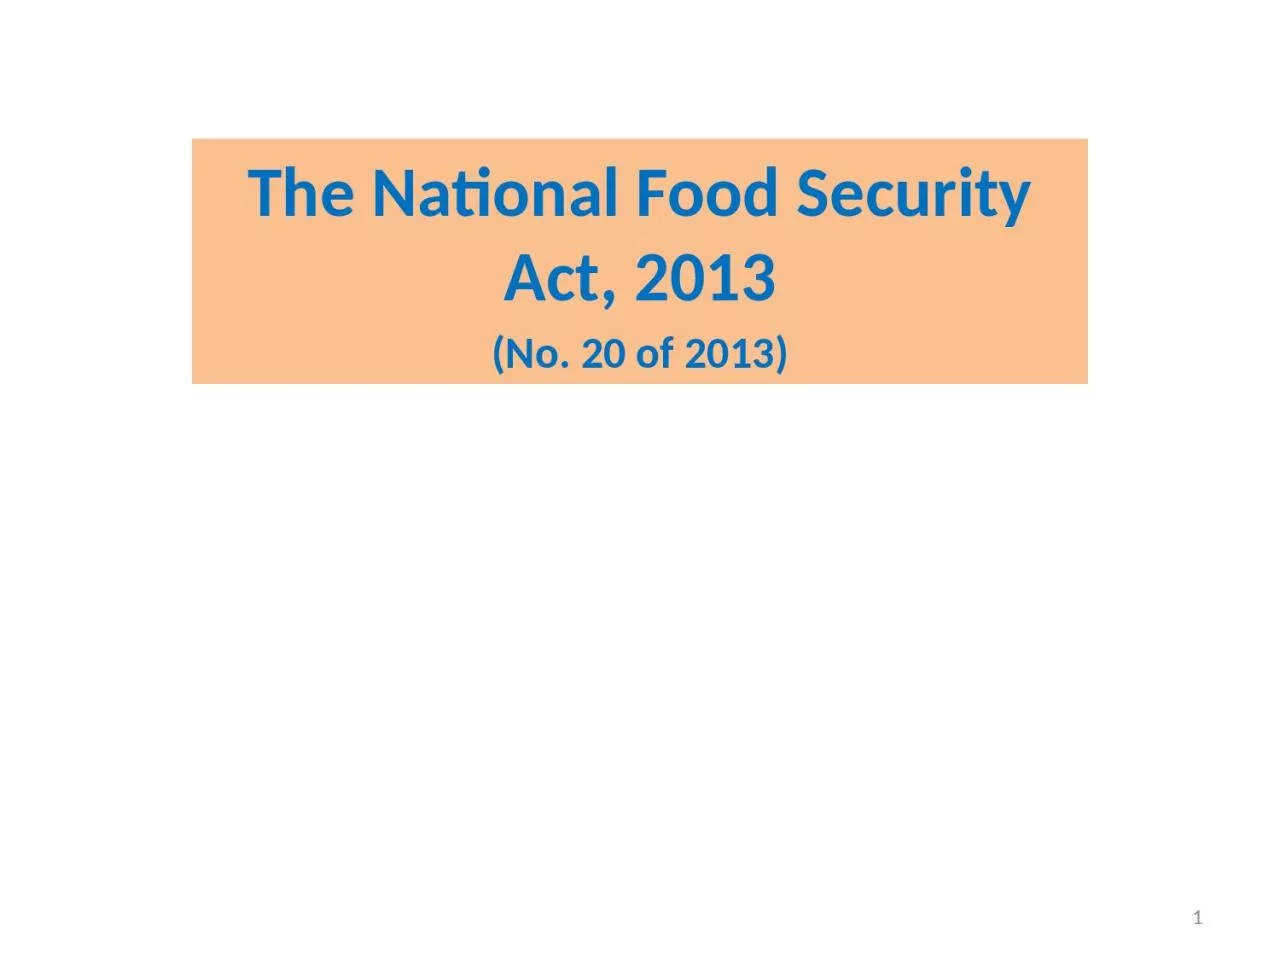 The National Food Security Act, 2013